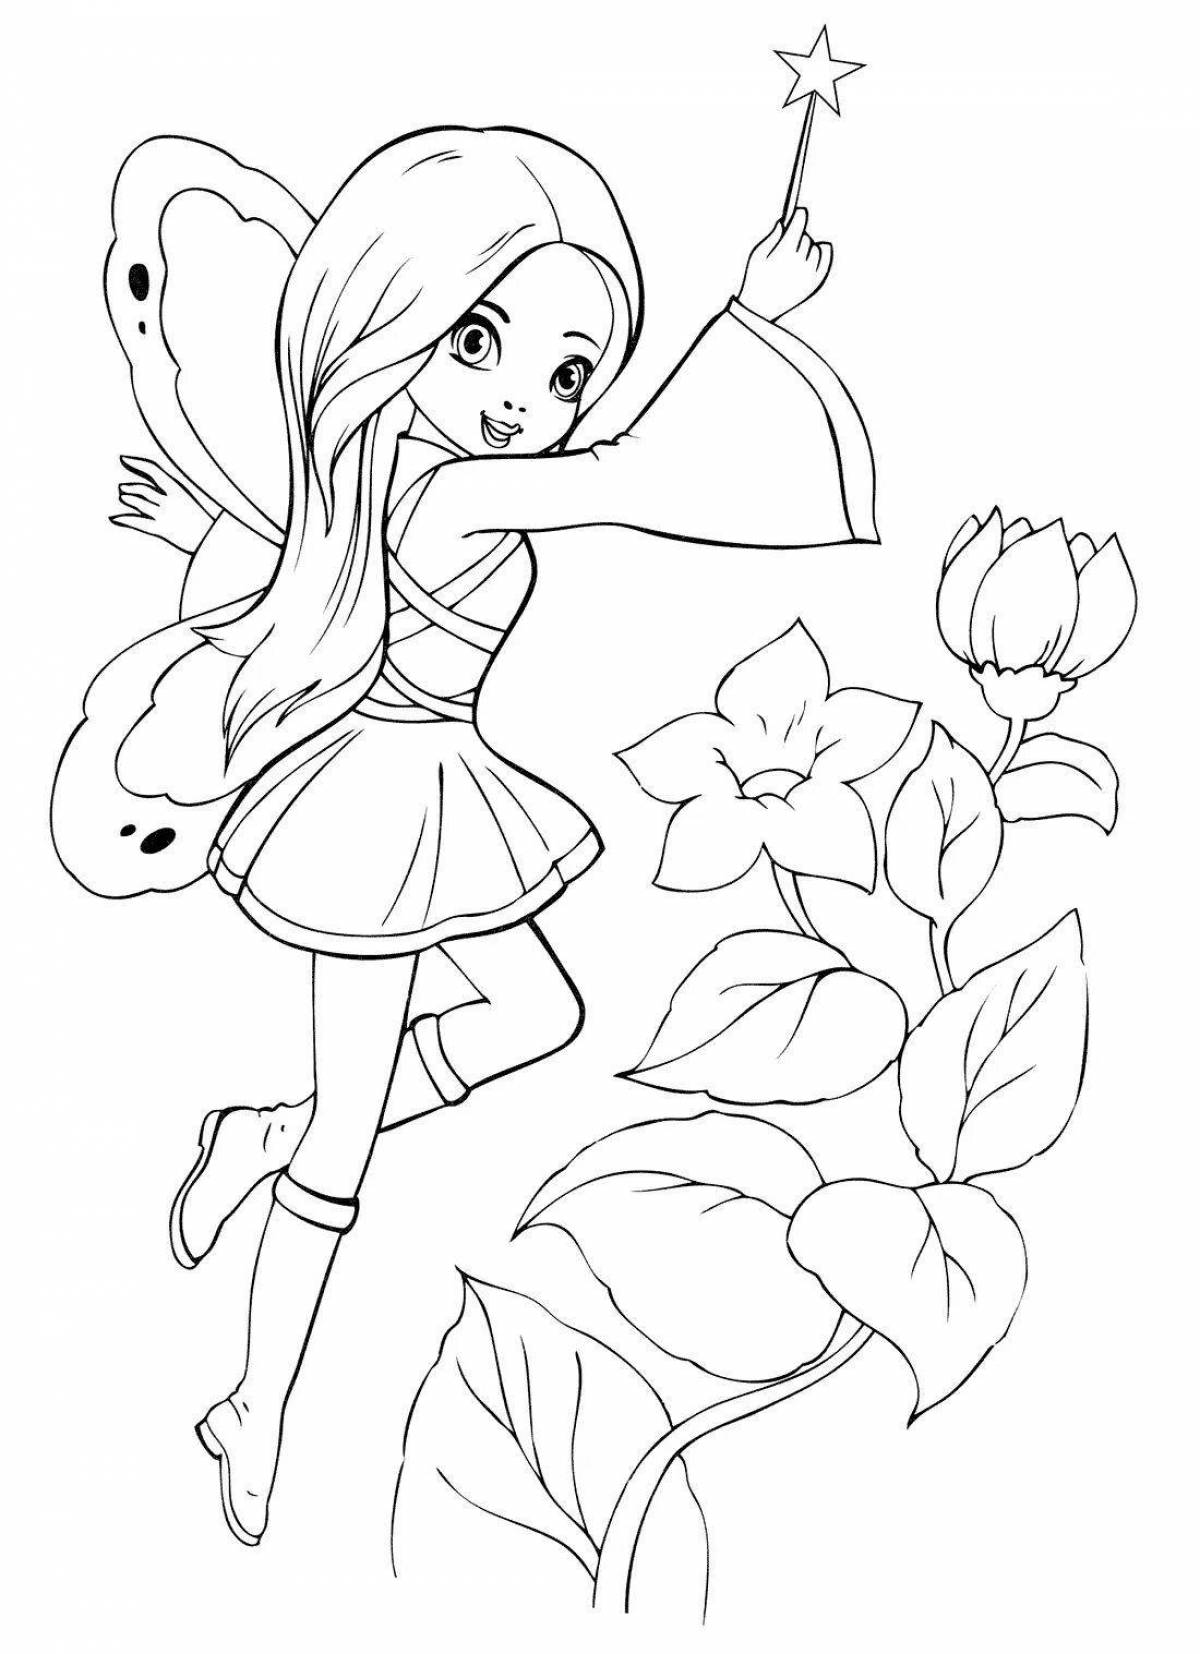 Color-frenzy coloring page for 7 year old girls